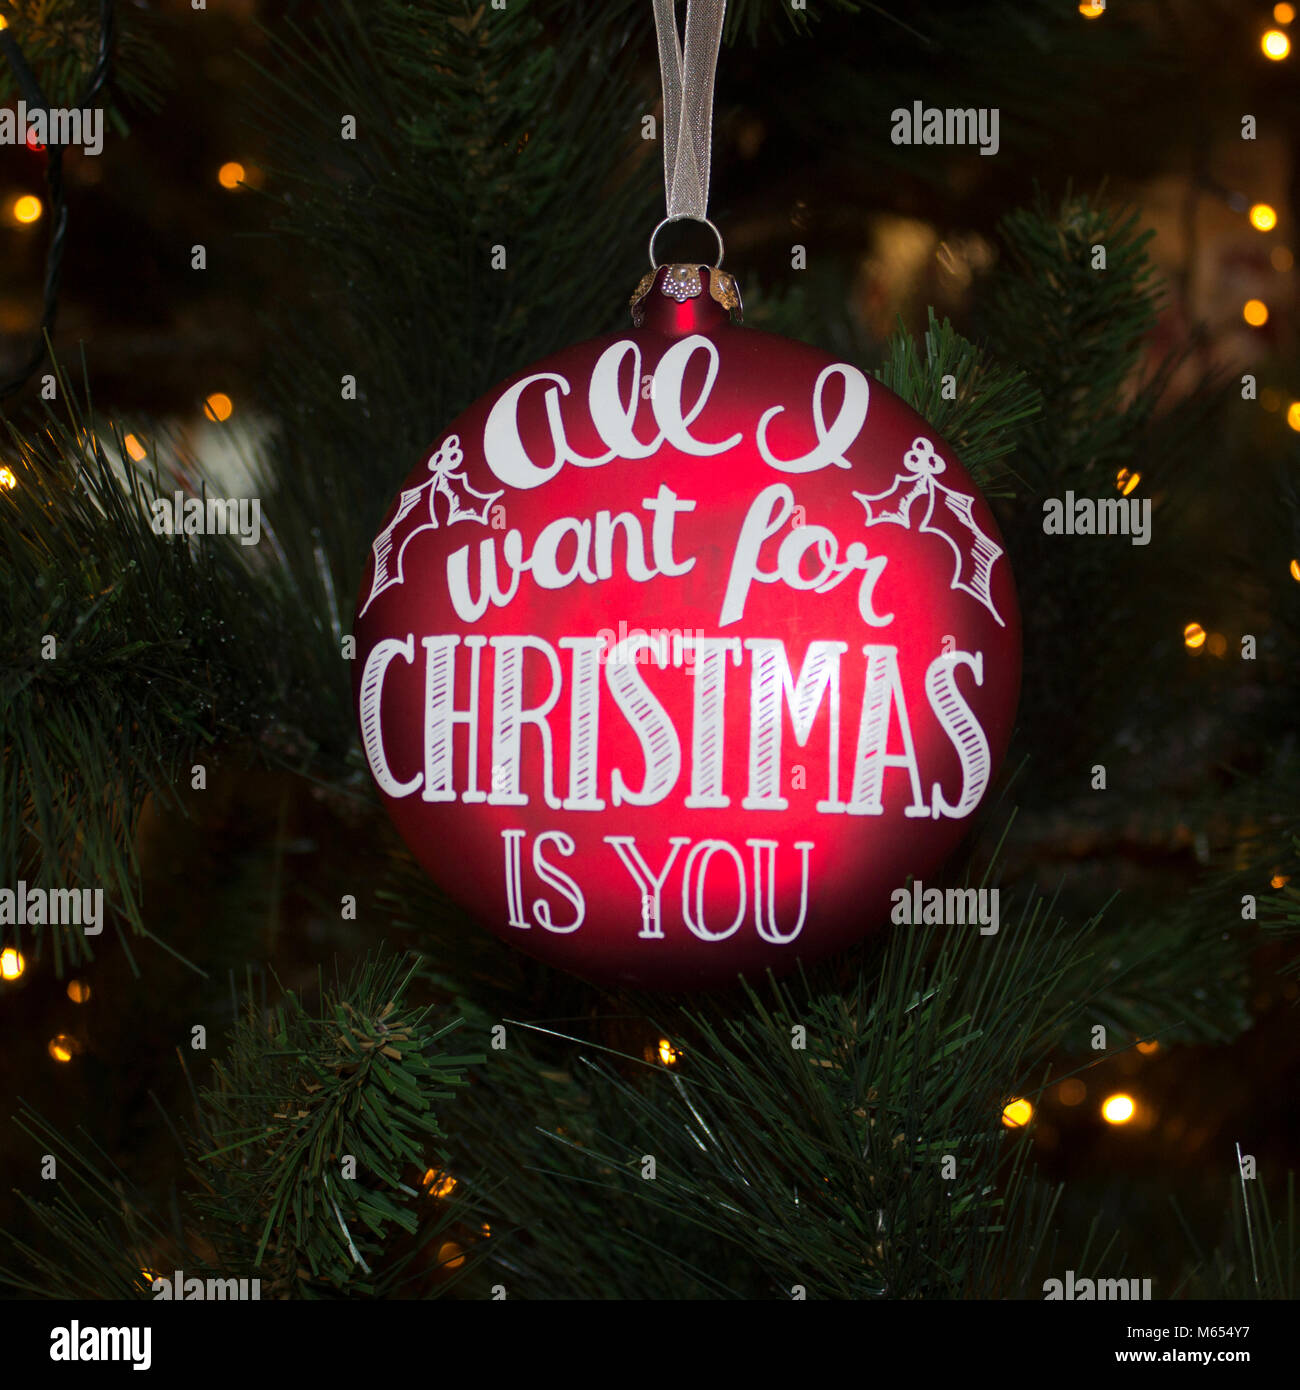 All I Want for Christmas is you. Stock Photo